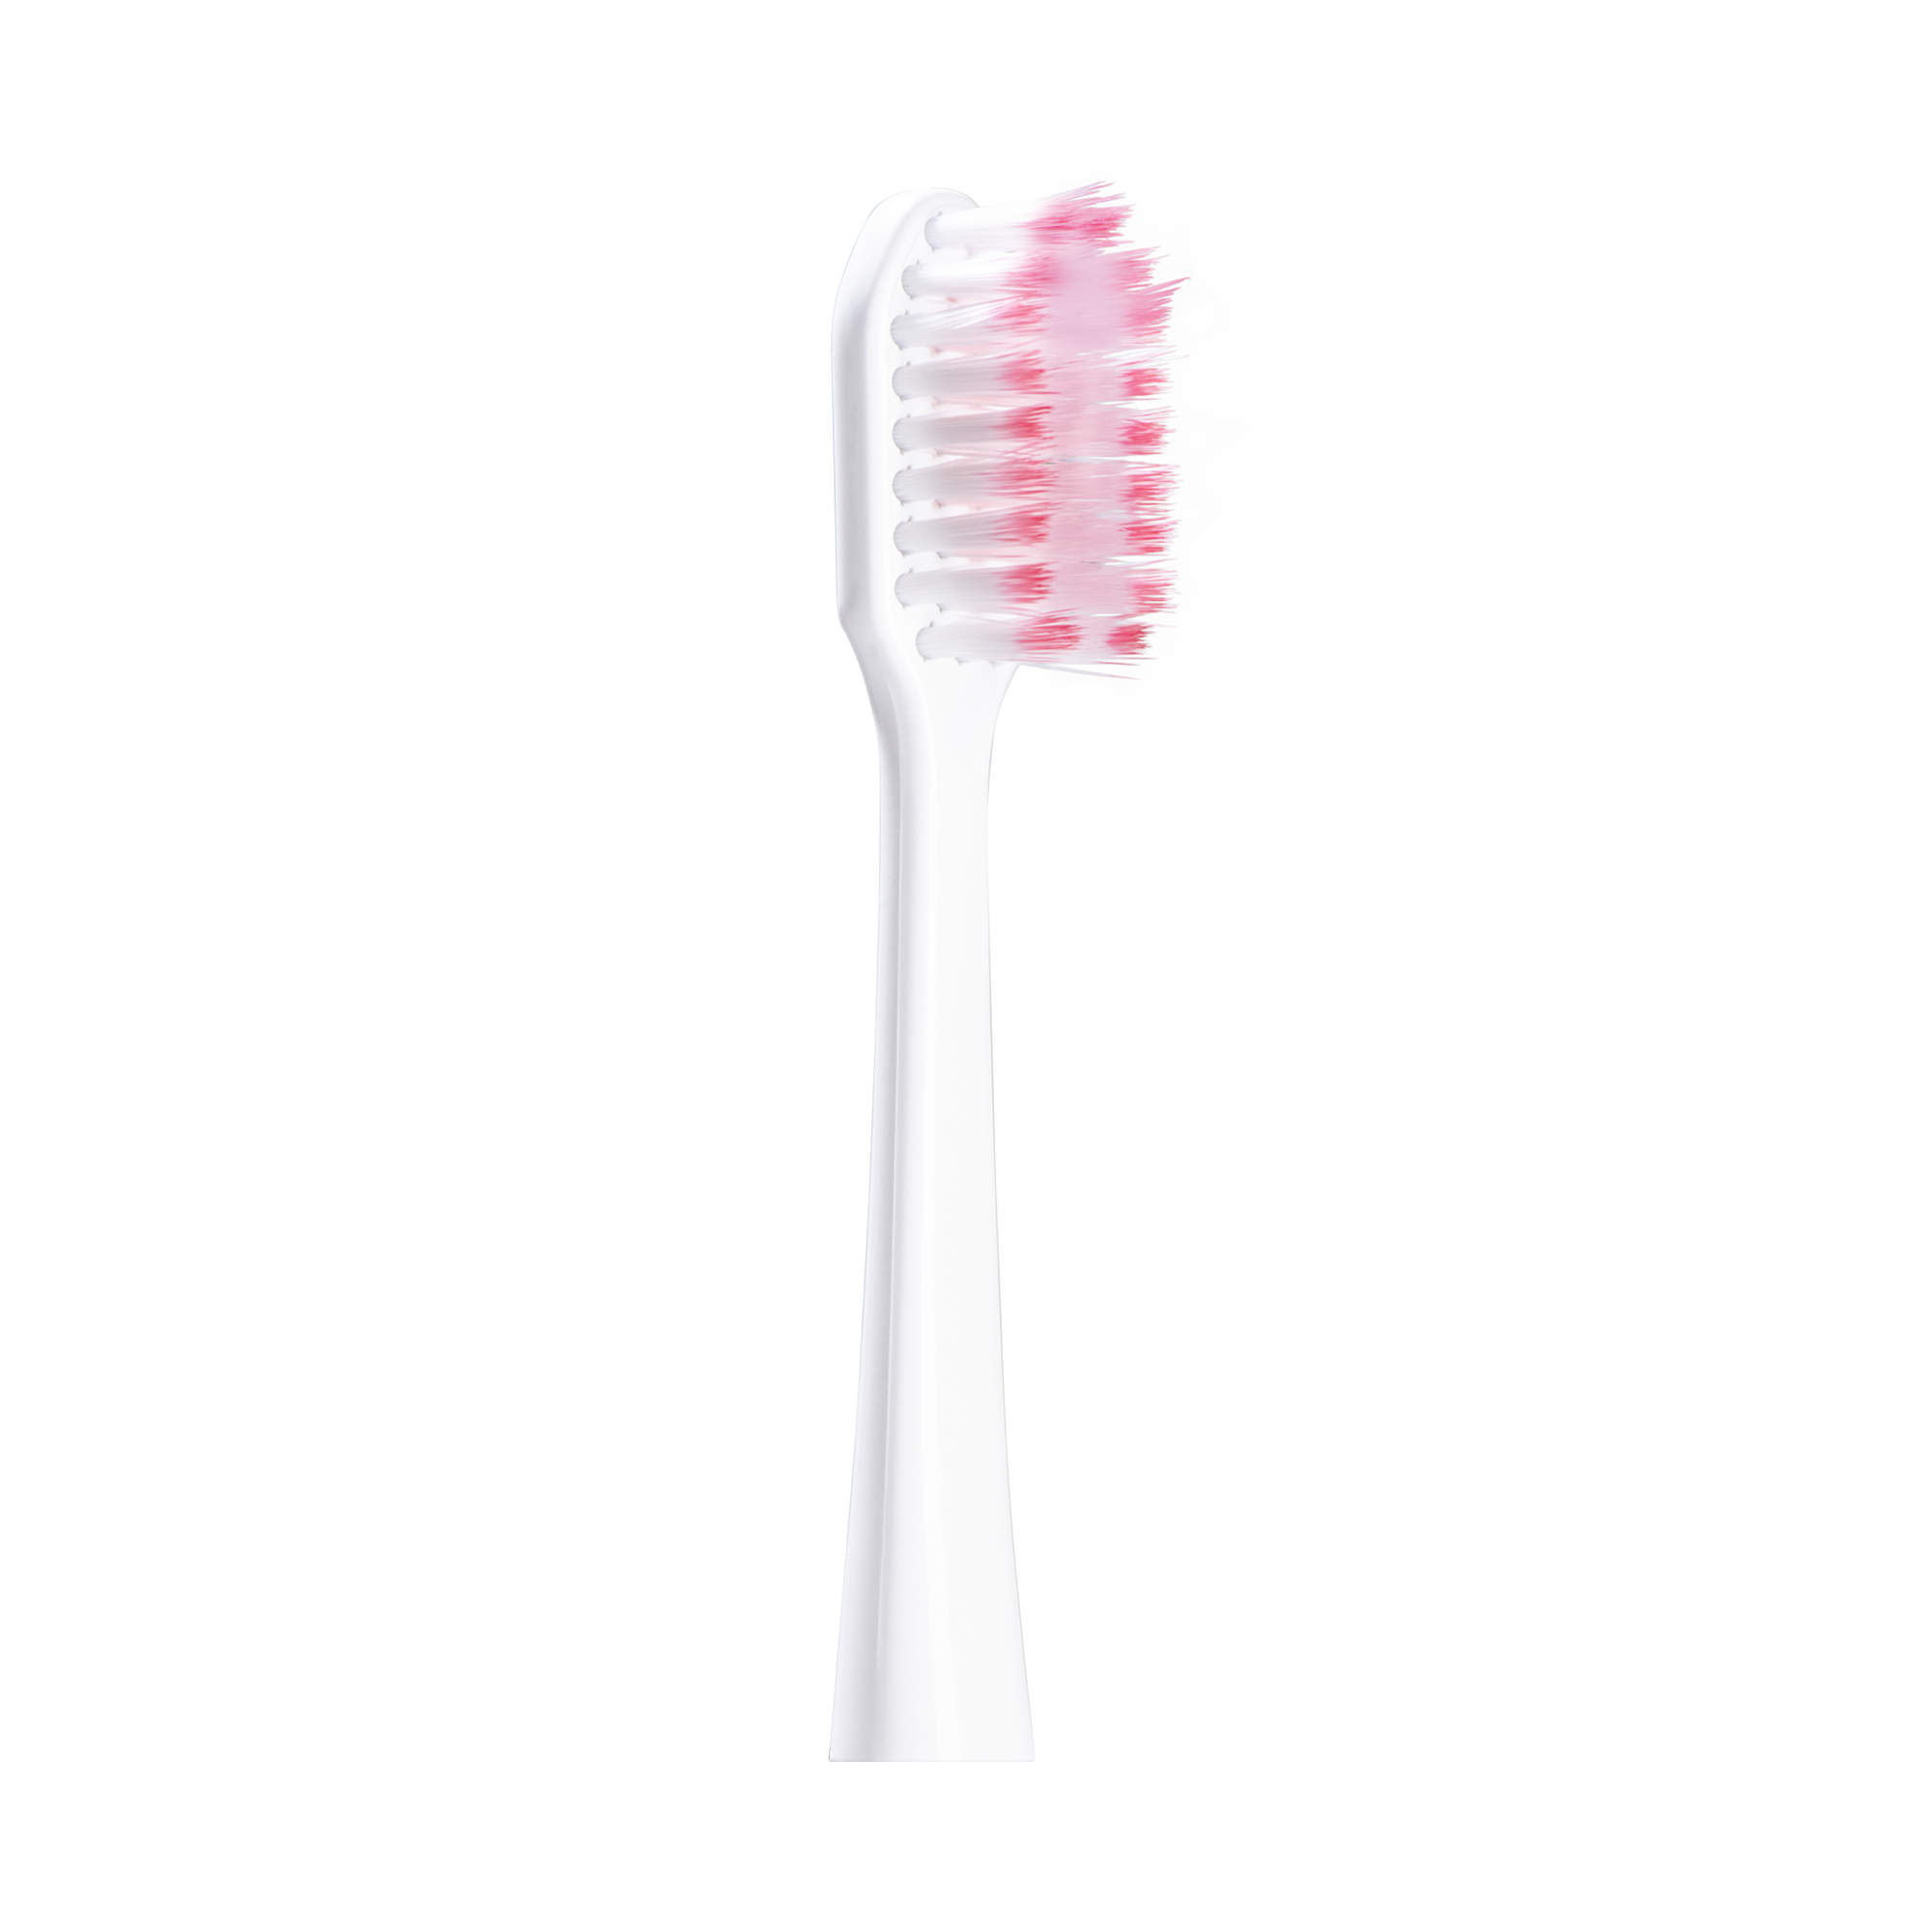 GUM SONIC SENSITIVE Replacement Heads For Battery Powered Toothbrush